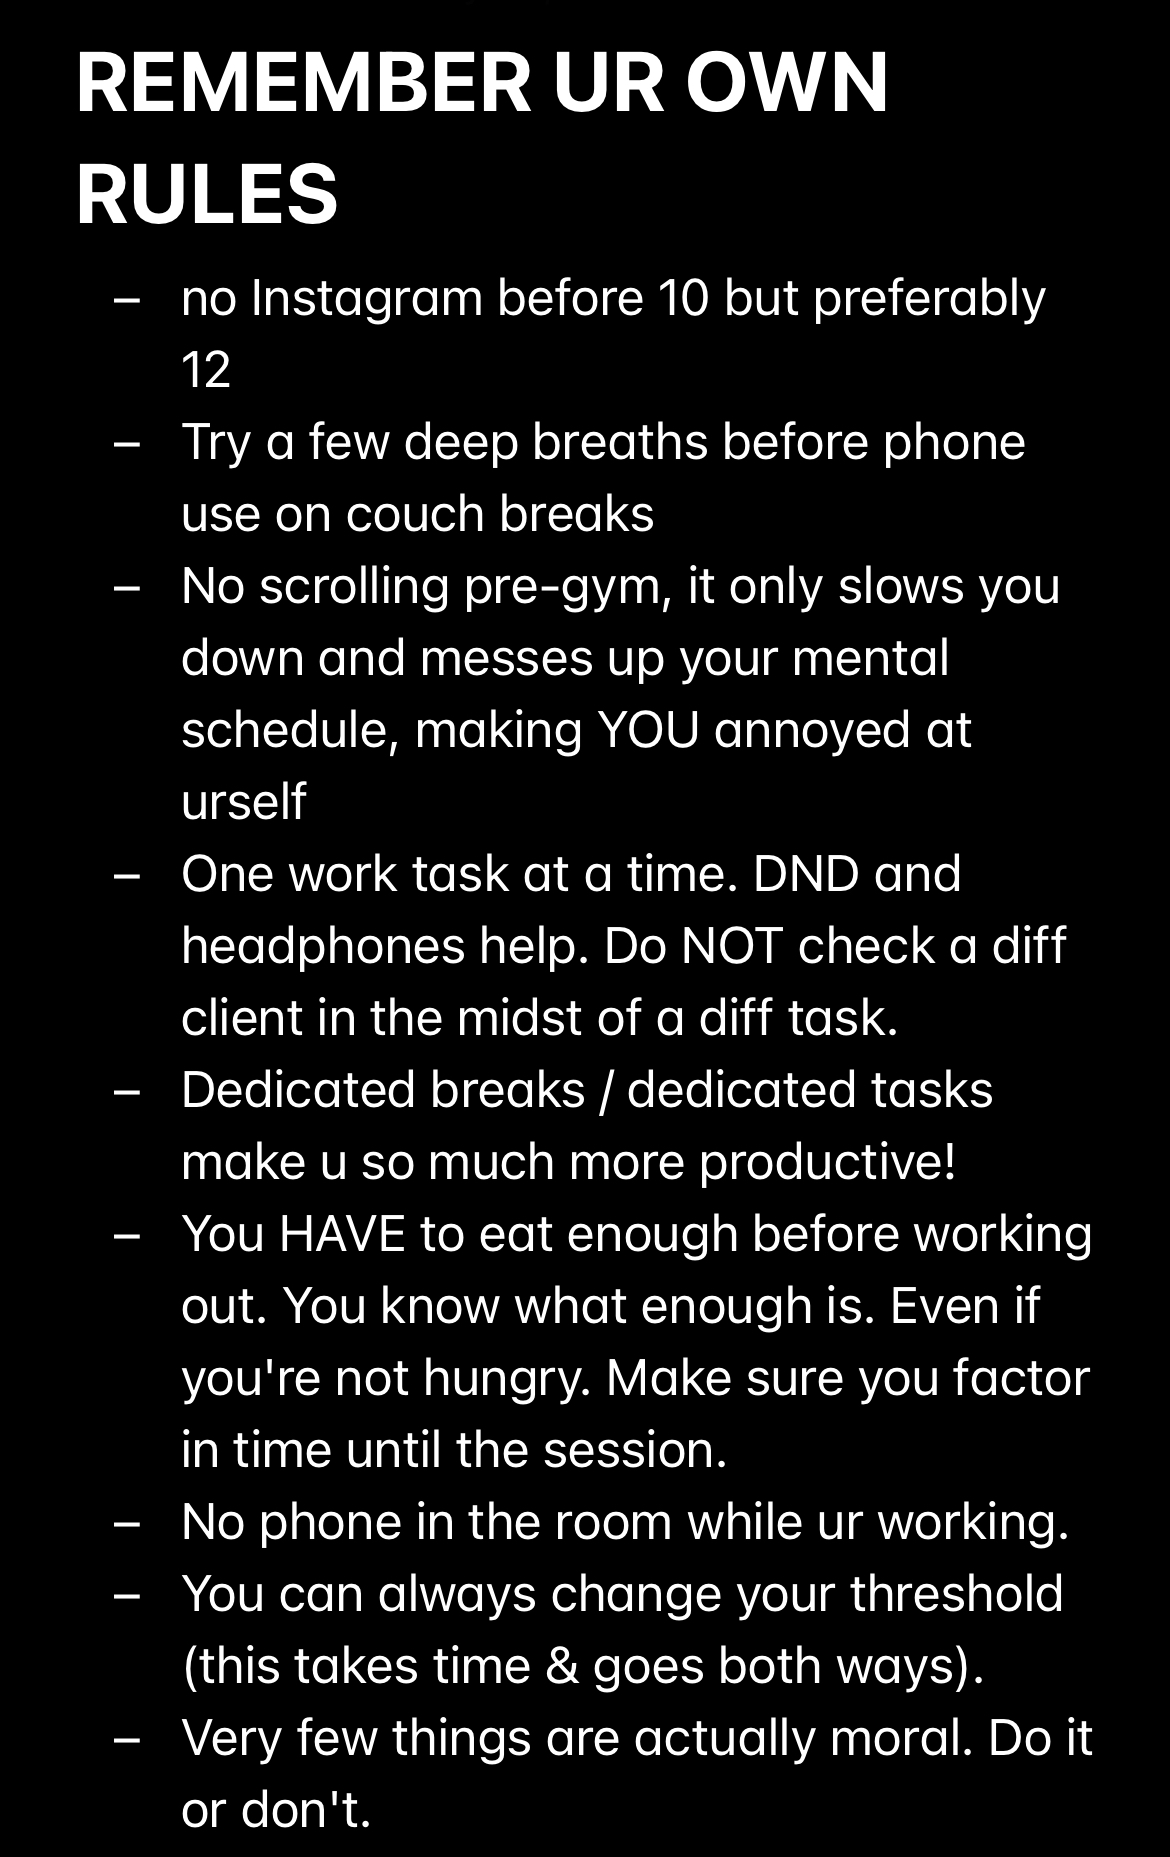  Screenshot of text with title “Remember ur own rules:” no Instagram before 10 but preferably 12 - Try a few deep breaths before phone use on couch breaks  - No scrolling pre-gym, it only slows you down and messes up your mental schedule, making YOU annoyed at urself  - One work task at a time. DND and headphones help. Do NOT check a diff client in the midst of a diff task.  - Dedicated breaks / dedicated tasks make u so much more productive! - You HAVE to eat enough before working out. You know what enough is. Even if you're not hungry. Make sure you factor in time until the session.  - No phone in the room while ur working.  - You can always change your threshold (this takes time & goes both ways).  - Very few things are actually moral. Do it or don't. 